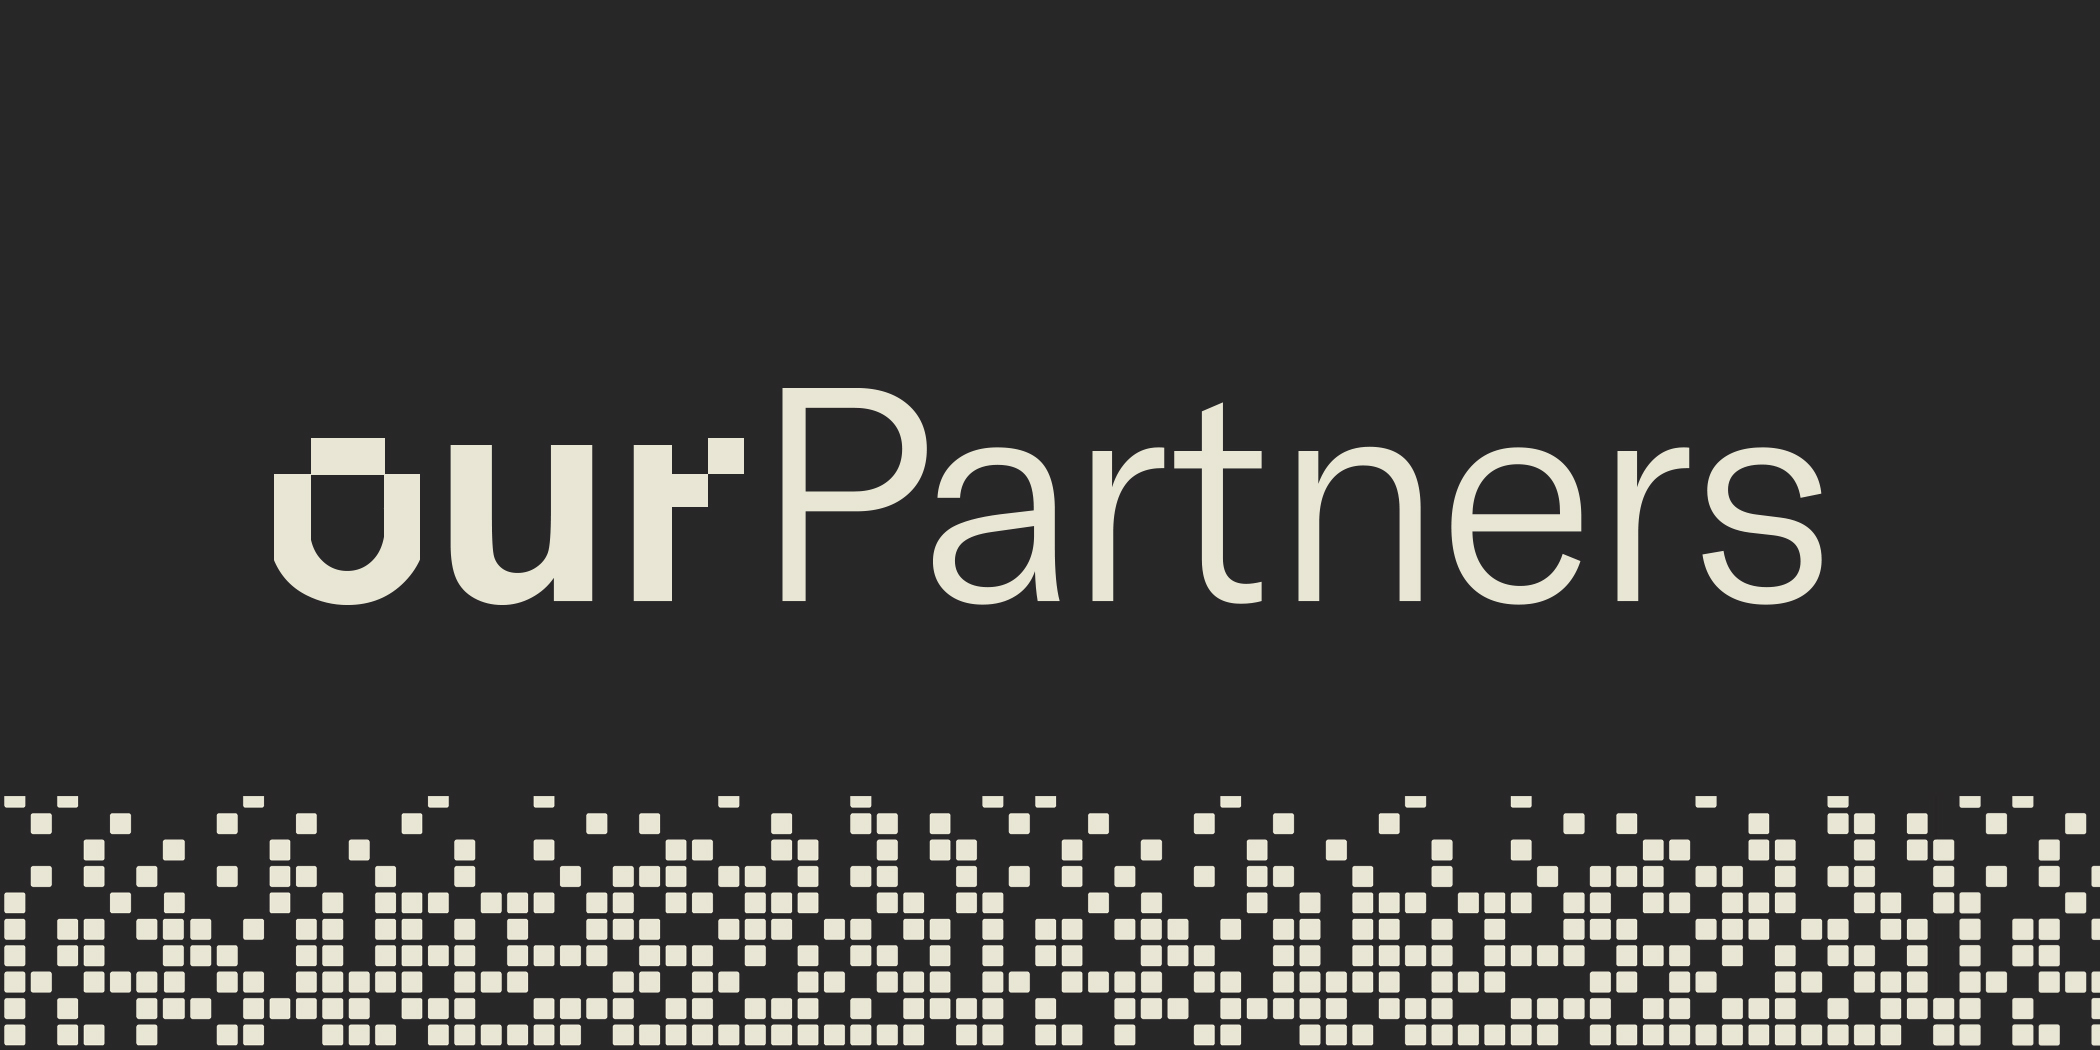 text "Our Partners" written out in camel case as if it were a programming variable.
